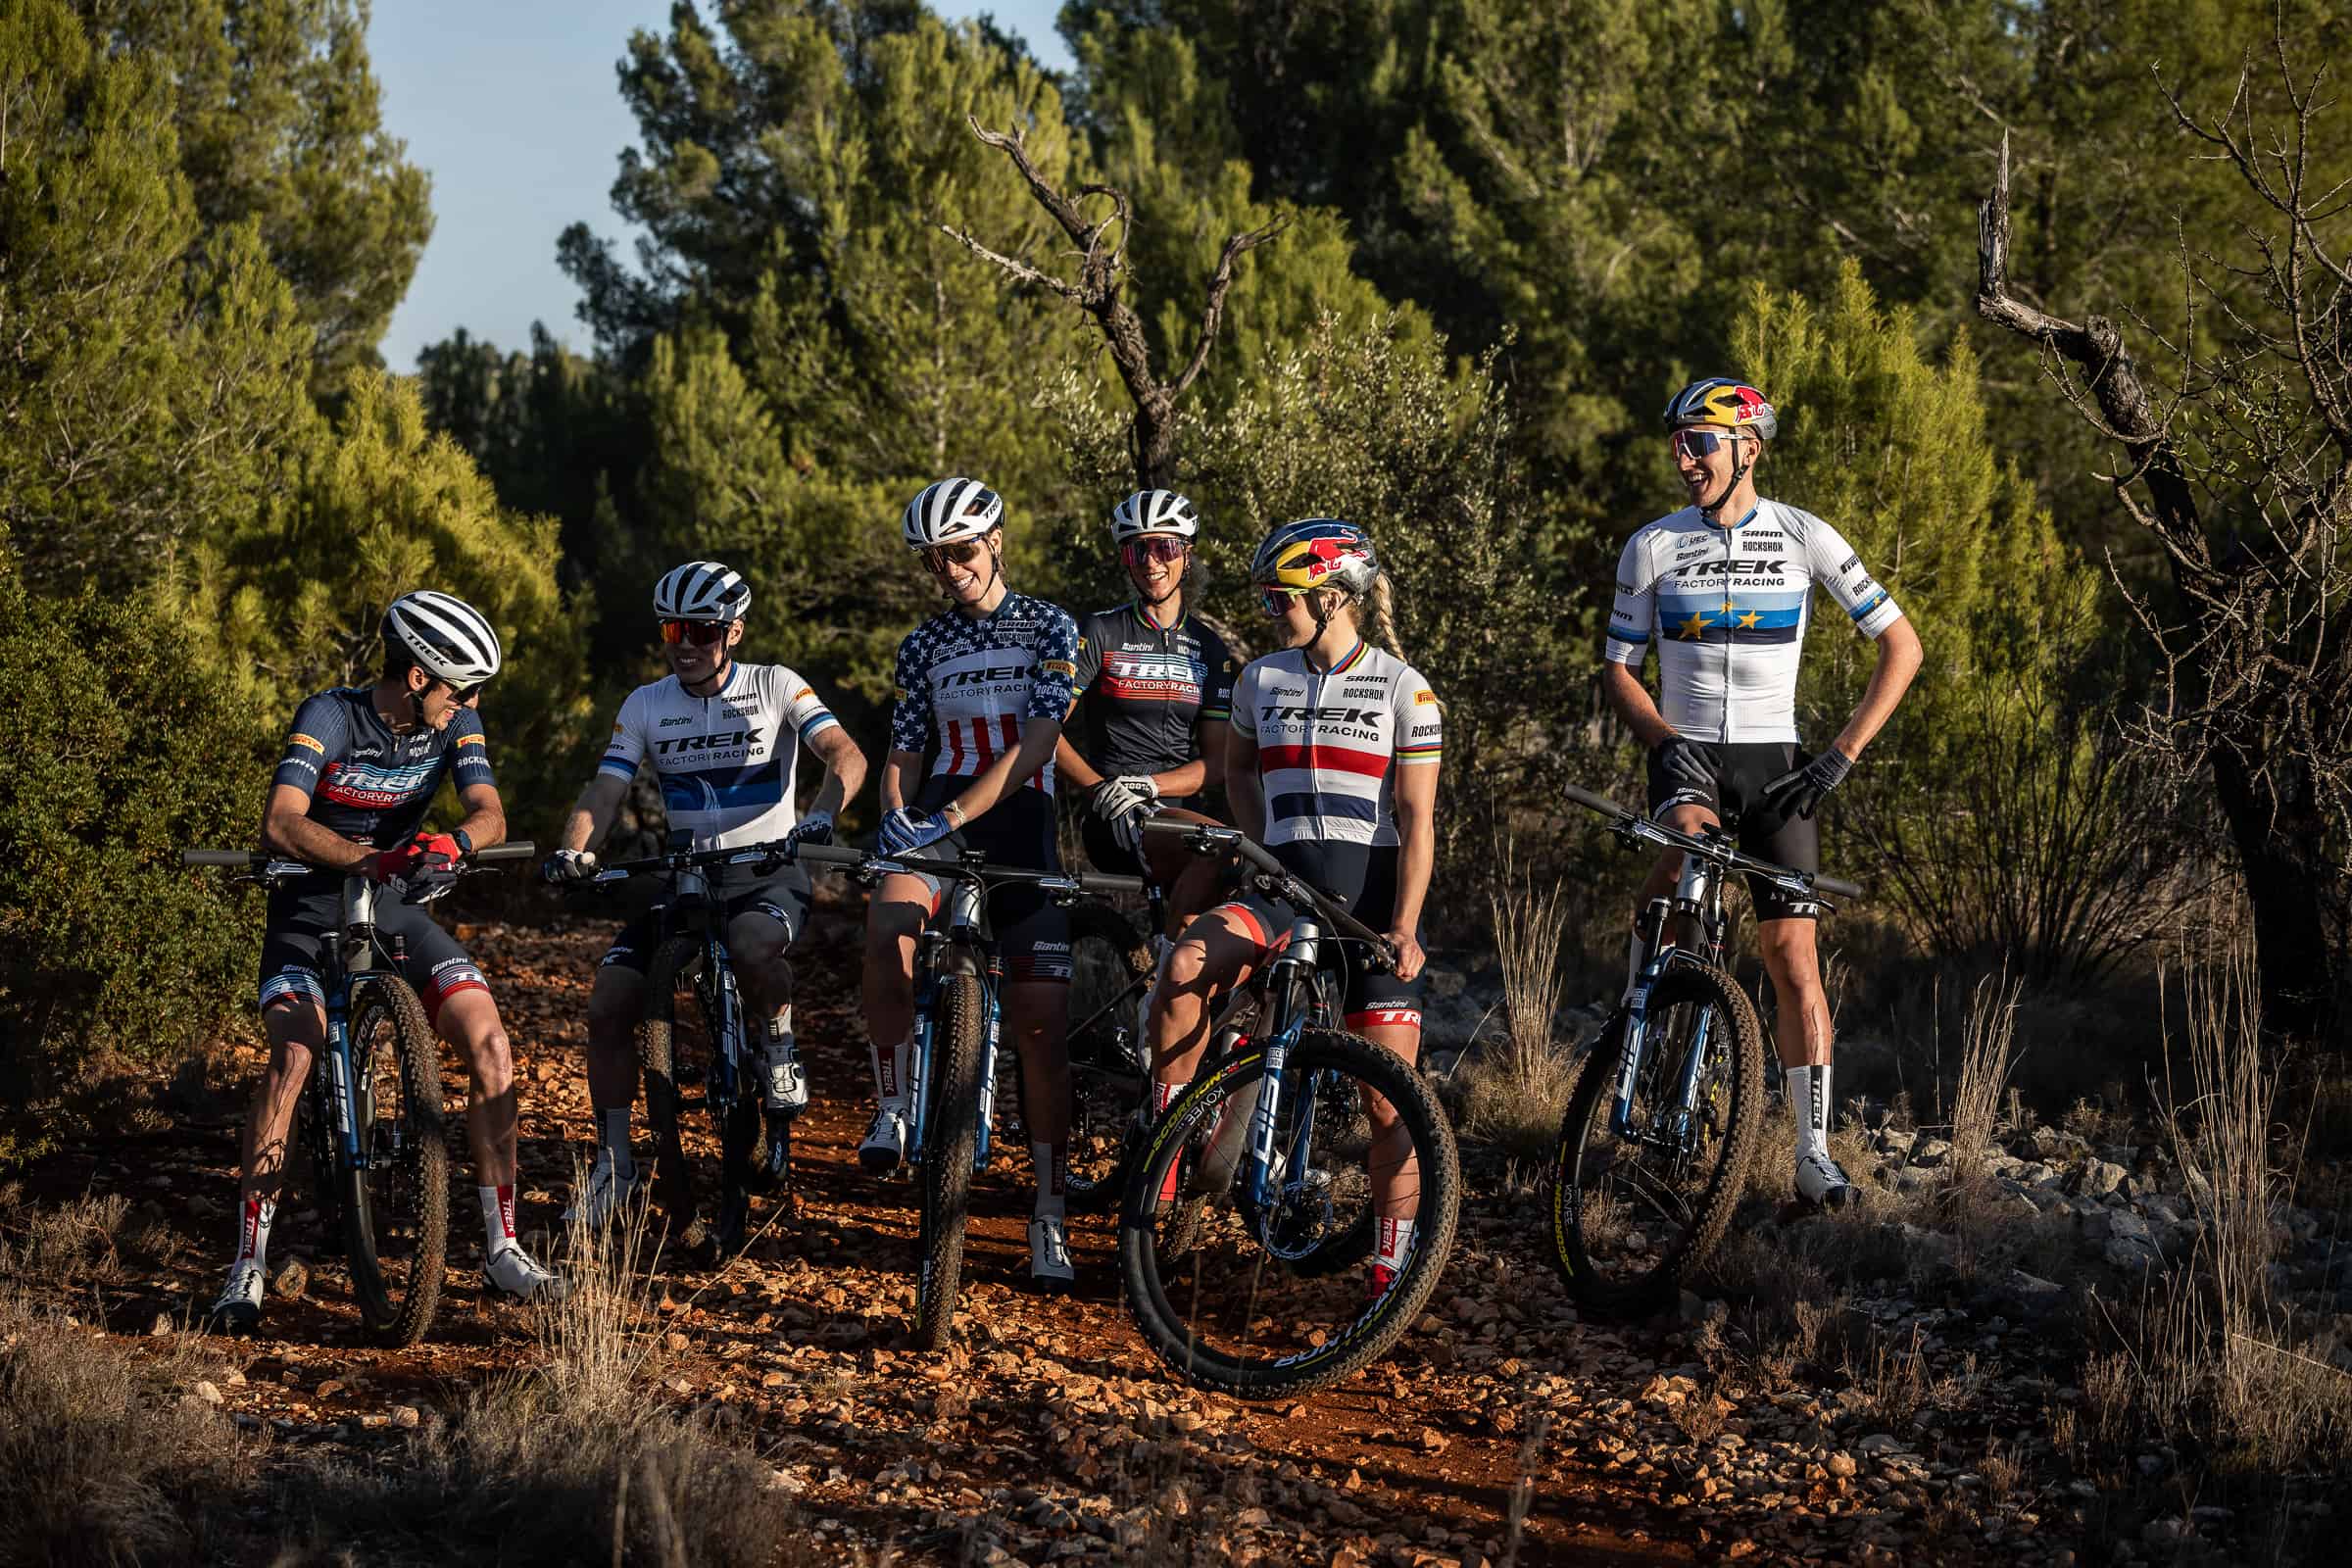 What does it take to be a Trek Factory Racing-Pirelli XC rider? 